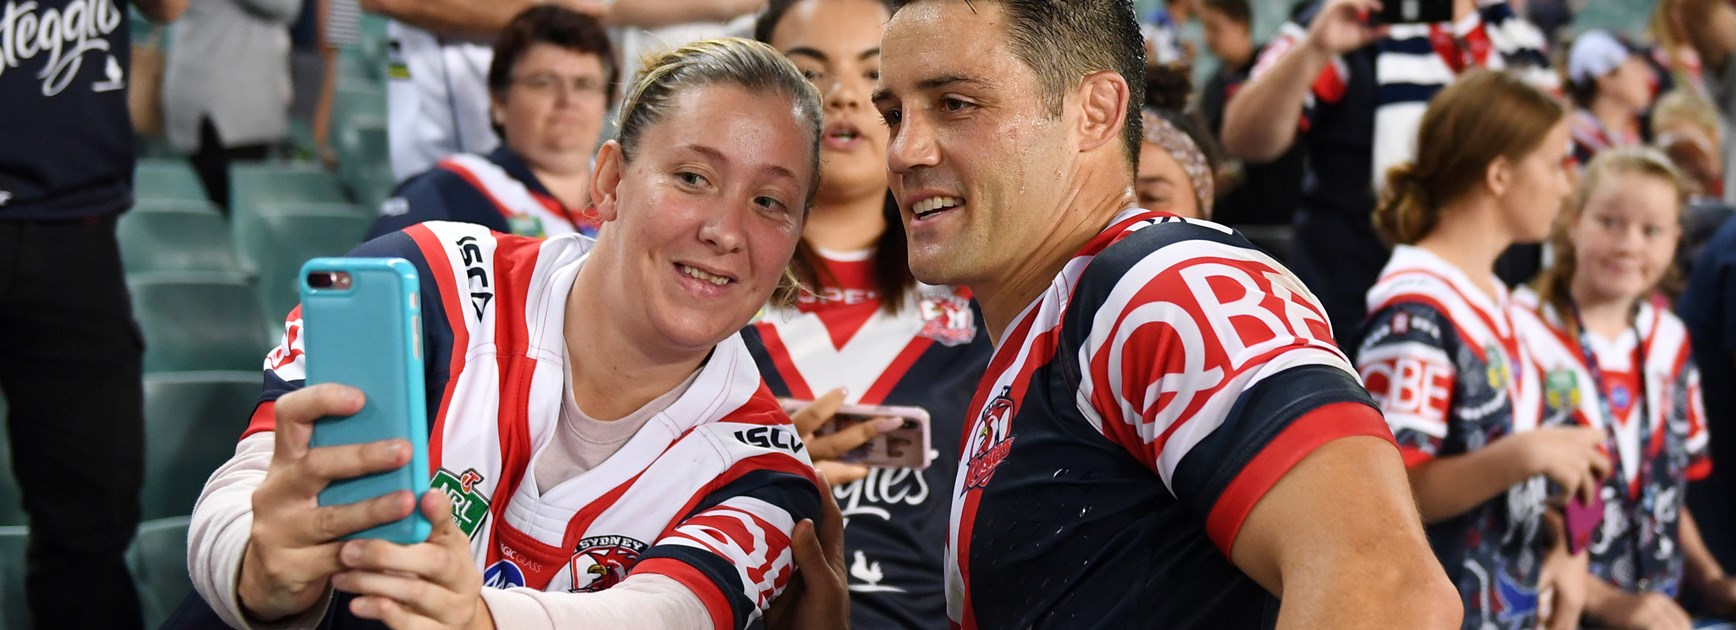 Cooper Cronk with Sydney Roosters fans.